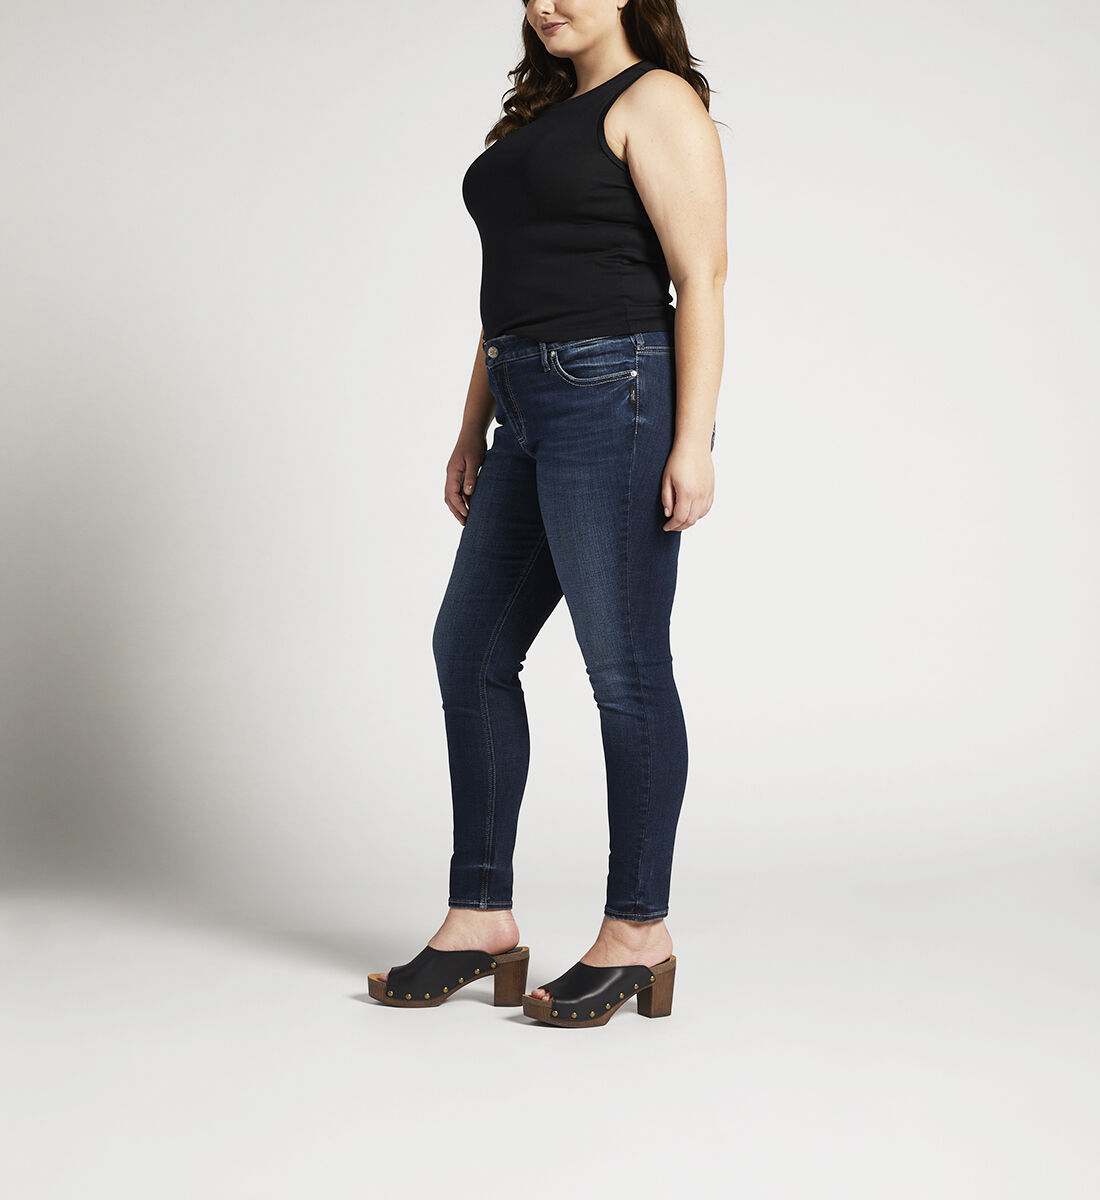 Elyse Mid Rise Skinny Jeans Plus Size Side